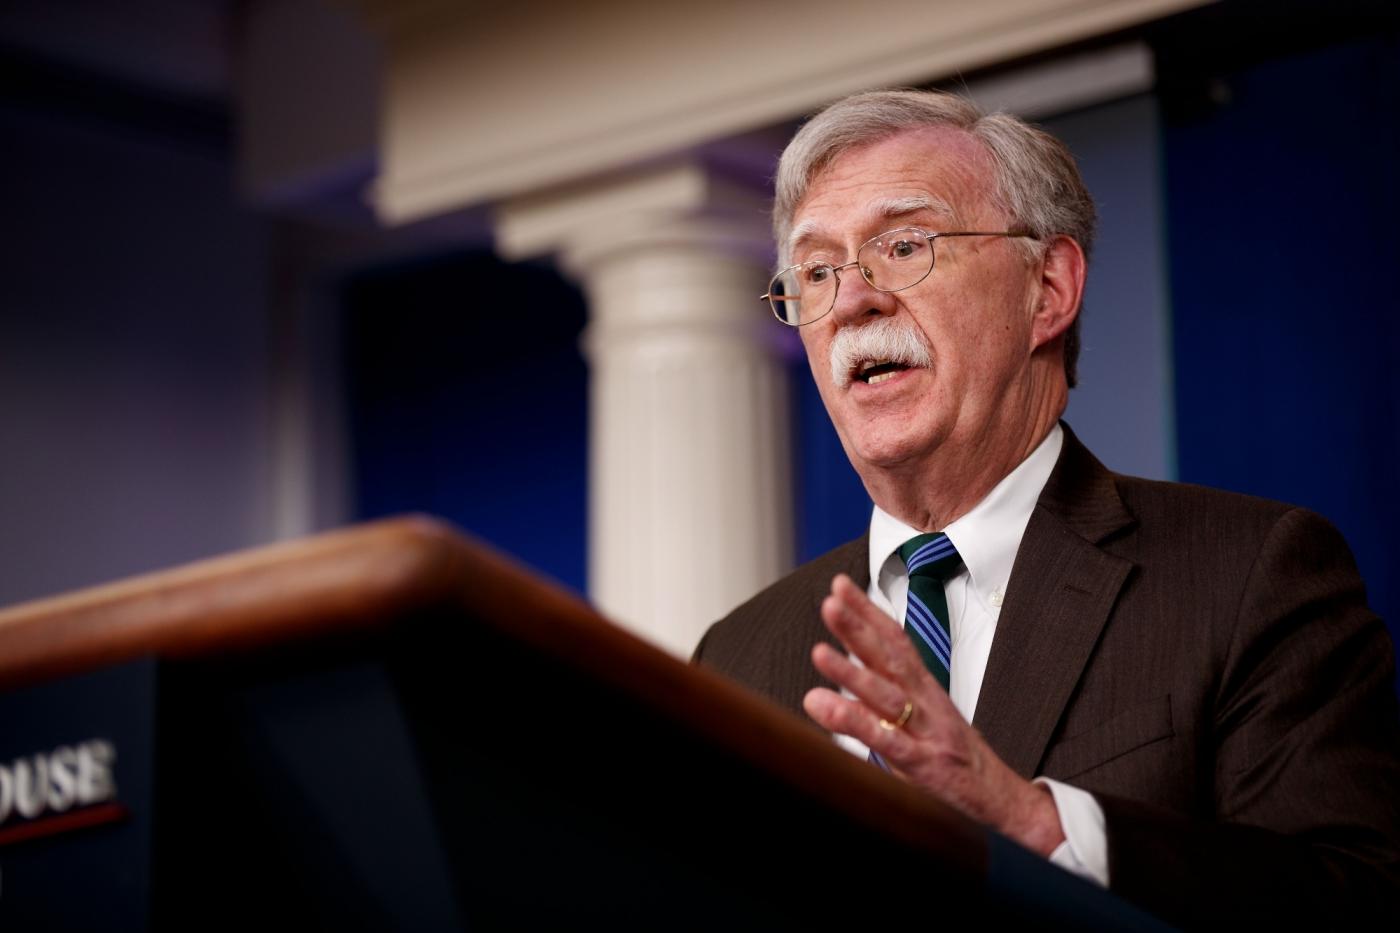 WASHINGTON, Nov. 27, 2018 (Xinhua) -- U.S. National Security Advisor John Bolton speaks at a press briefing at the White House in Washington D.C., the United States, on Nov. 27, 2018. John Bolton said on Tuesday that U.S. President Donald Trump and Saudi Crown Prince Mohammed bin Salman are not expected to hold a formal bilateral meeting during the Group of 20 (G20) summit in Argentina. (Xinhua/Ting Shen/IANS) by .